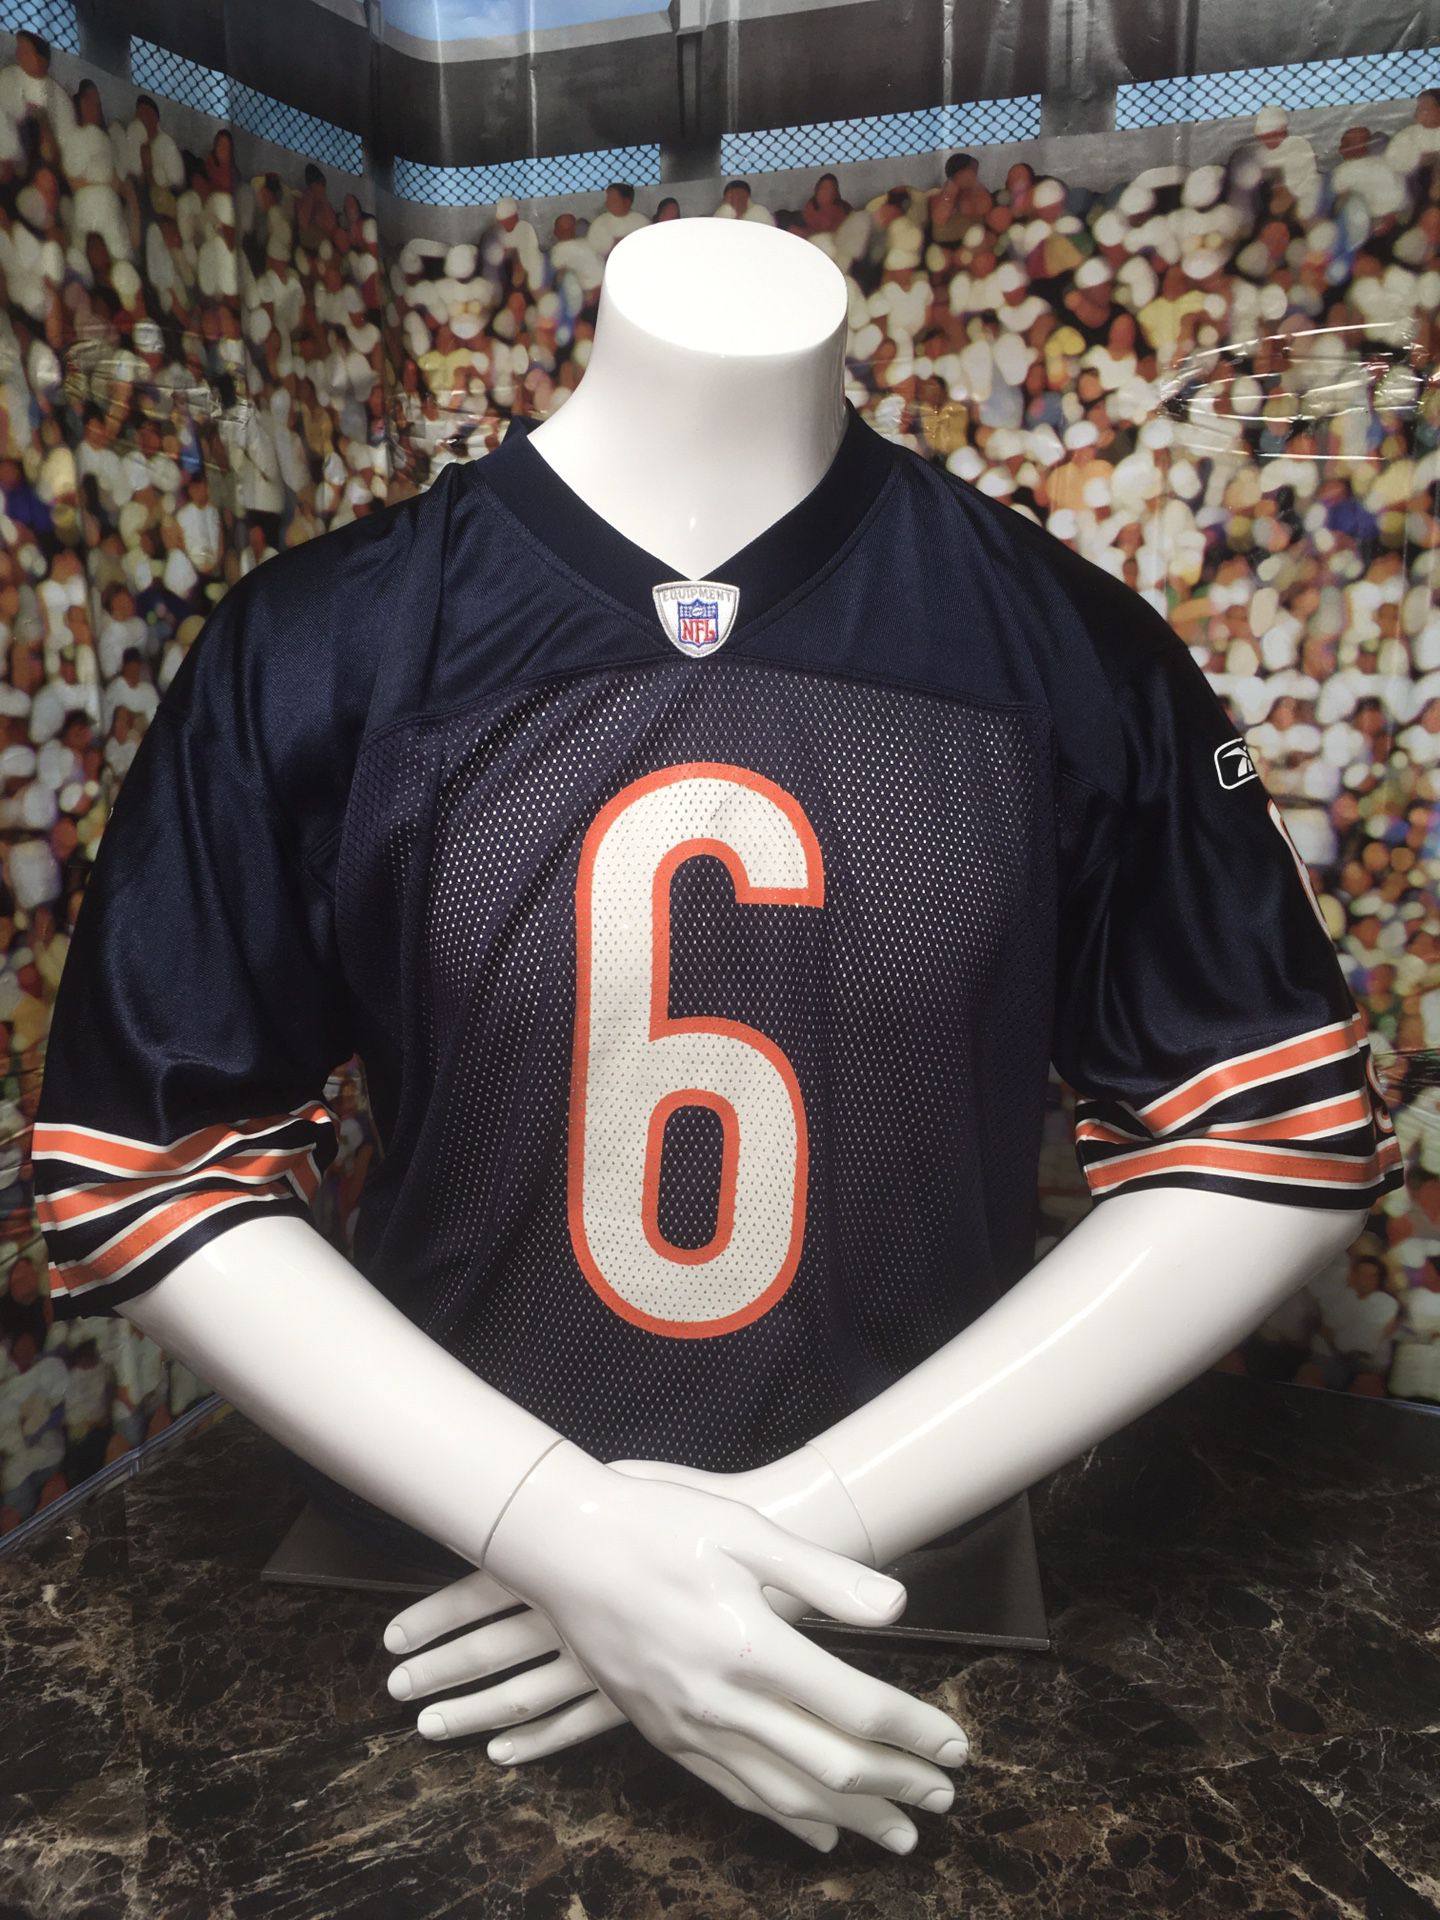 Chicago Bears Jay Cutler #6 Reebok Football Jersey LARGE Pre-owned No rips, tears or stains Minor cracking, please see photos